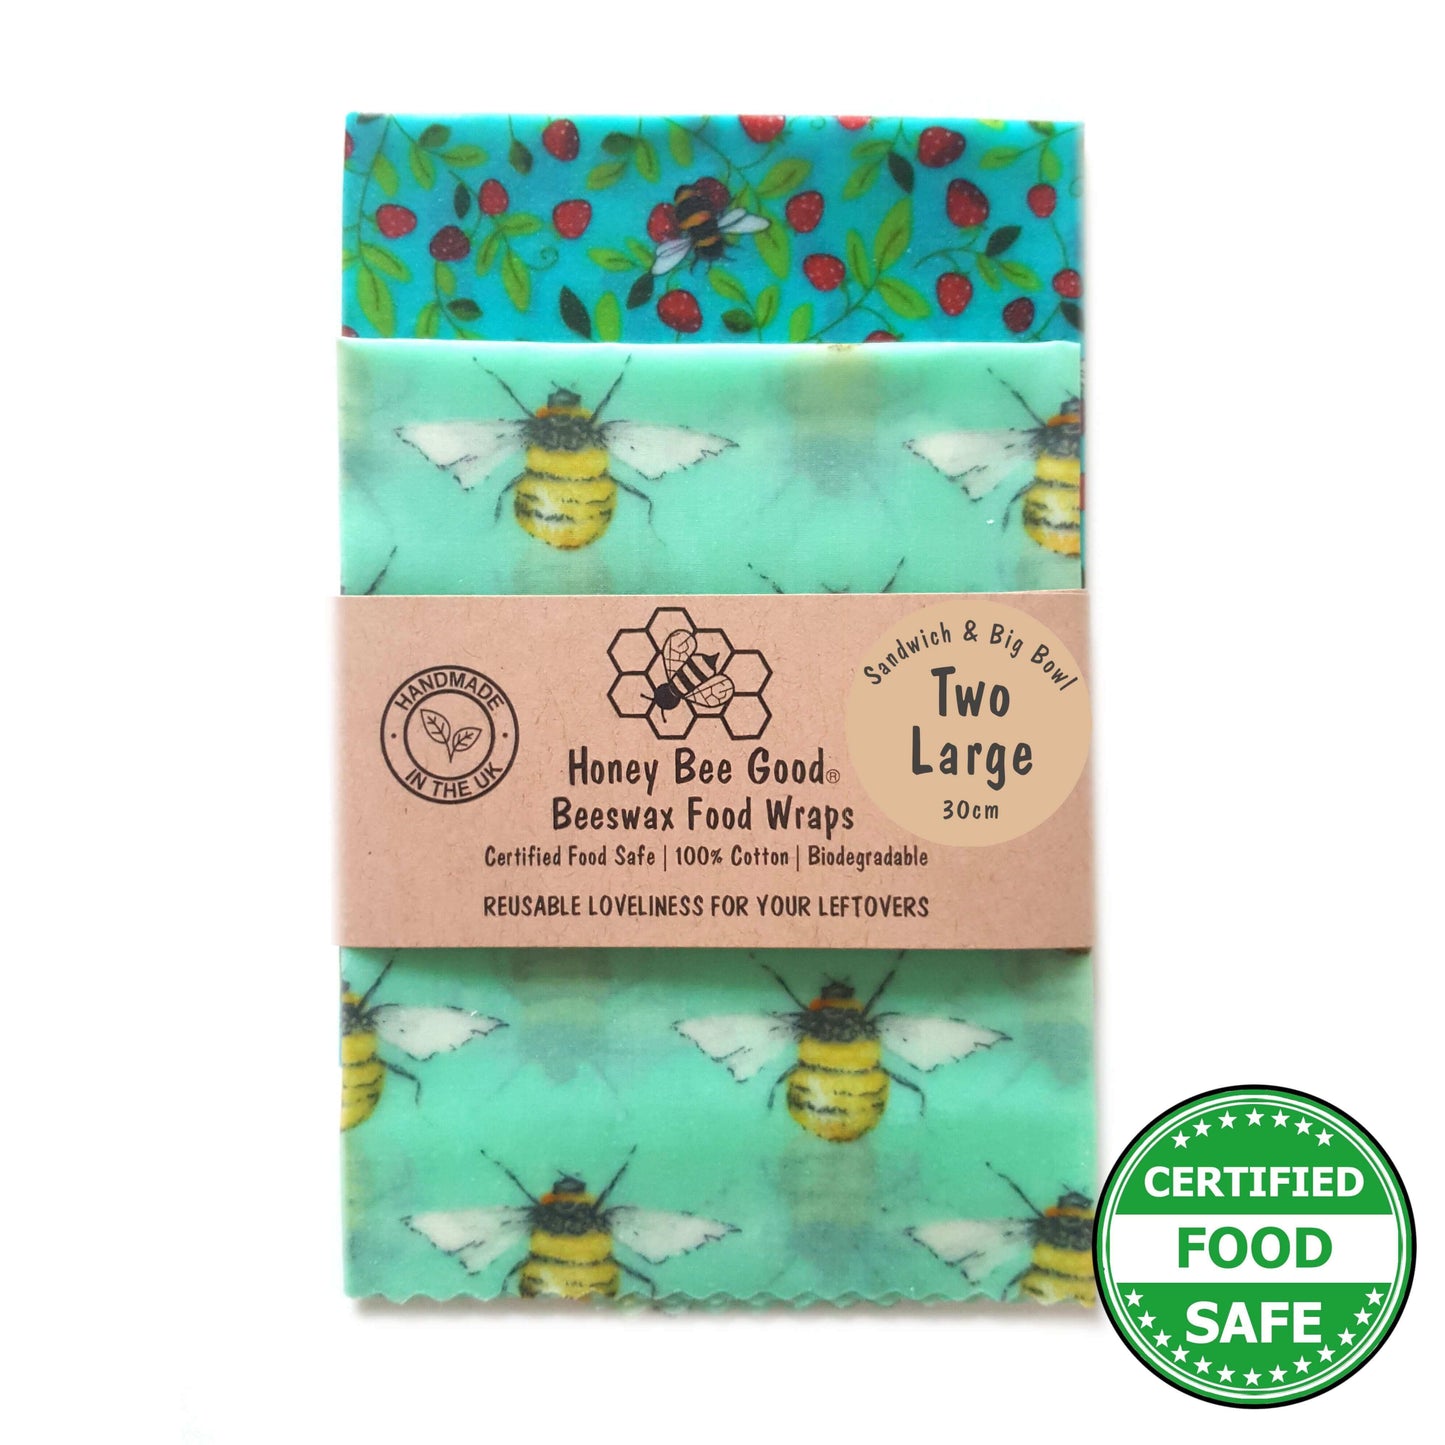 Sandwich & Bowl Set of 2 Large beeswax wraps